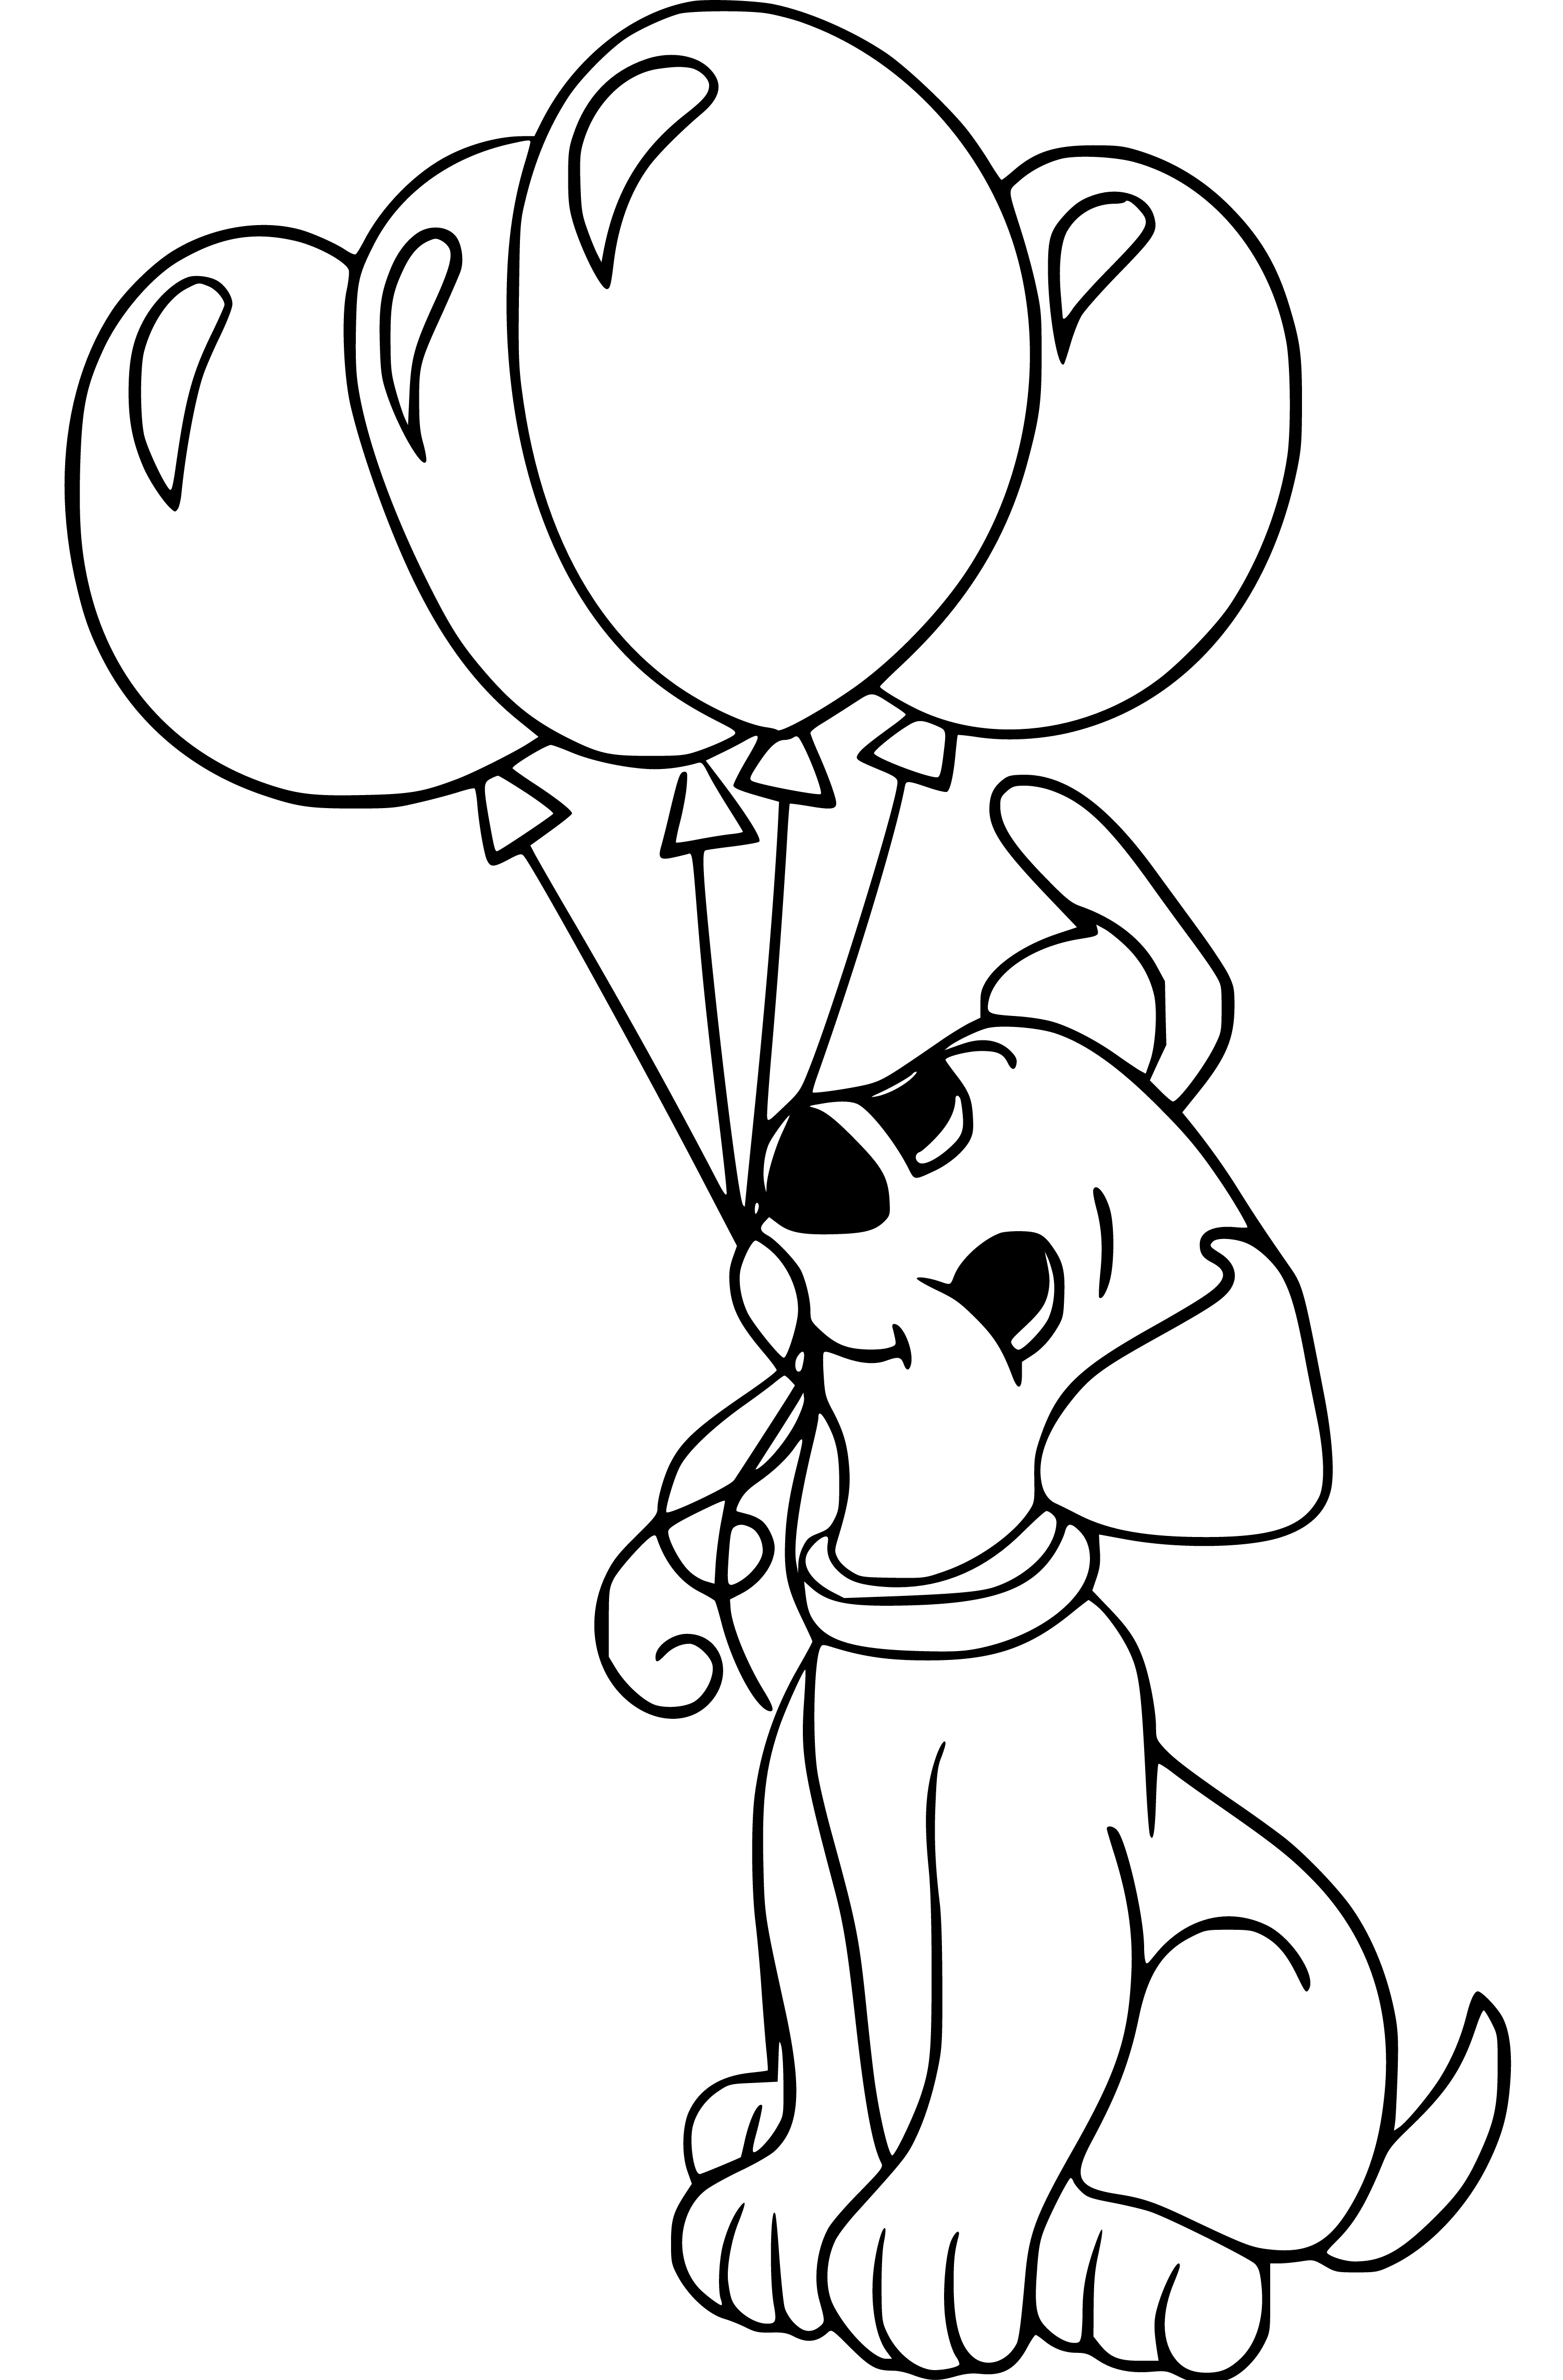 Printable Puppy with balloons Coloring Page for kids.